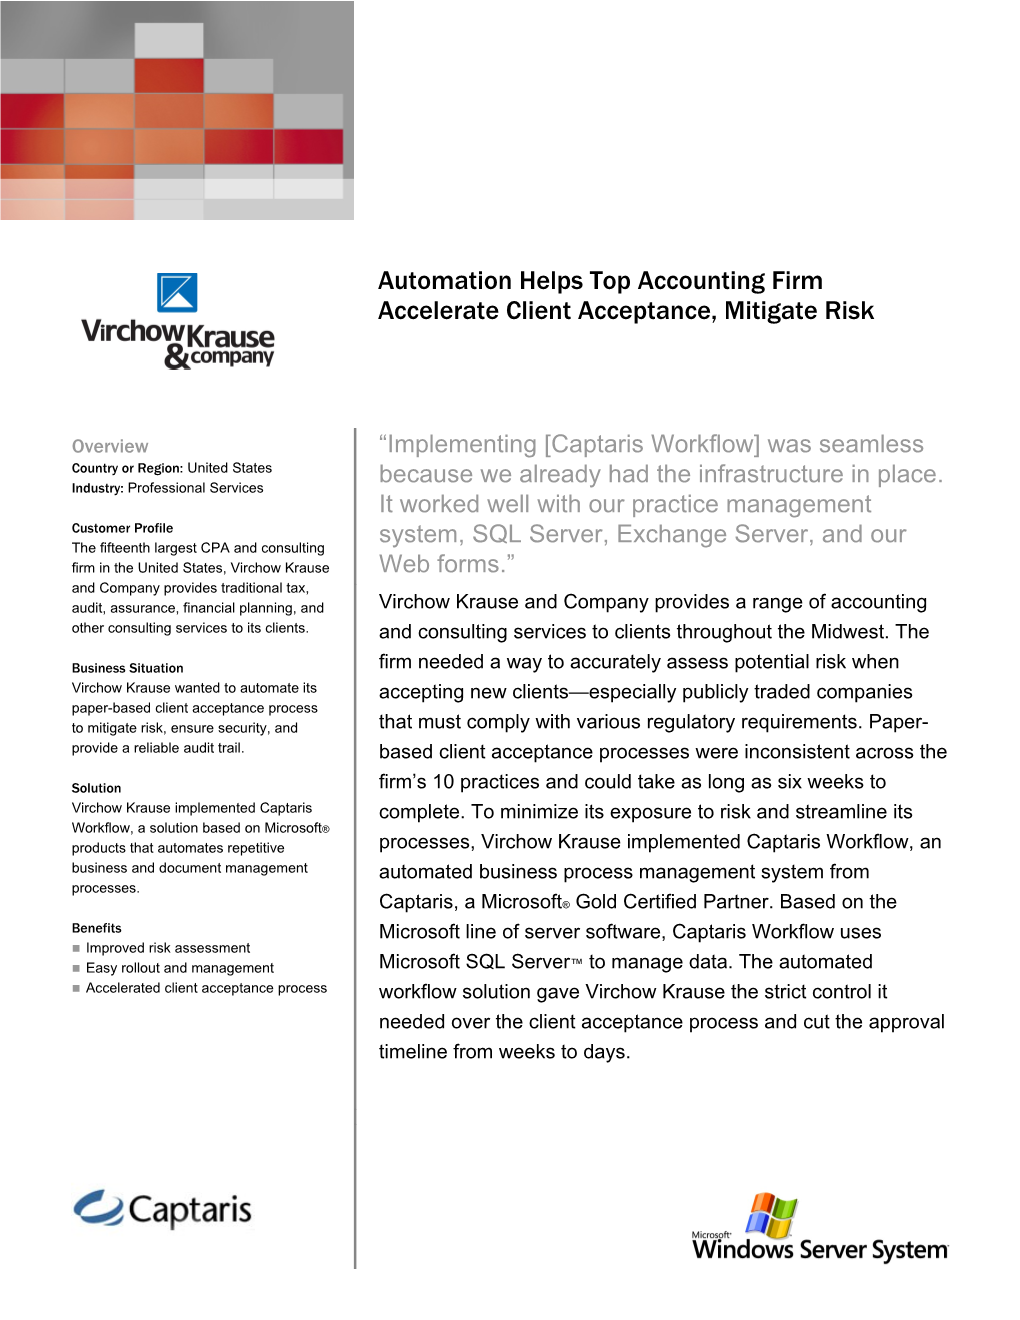 Automation Helps Top Accounting Firm Accelerate Client Acceptance, Mitigate Risk